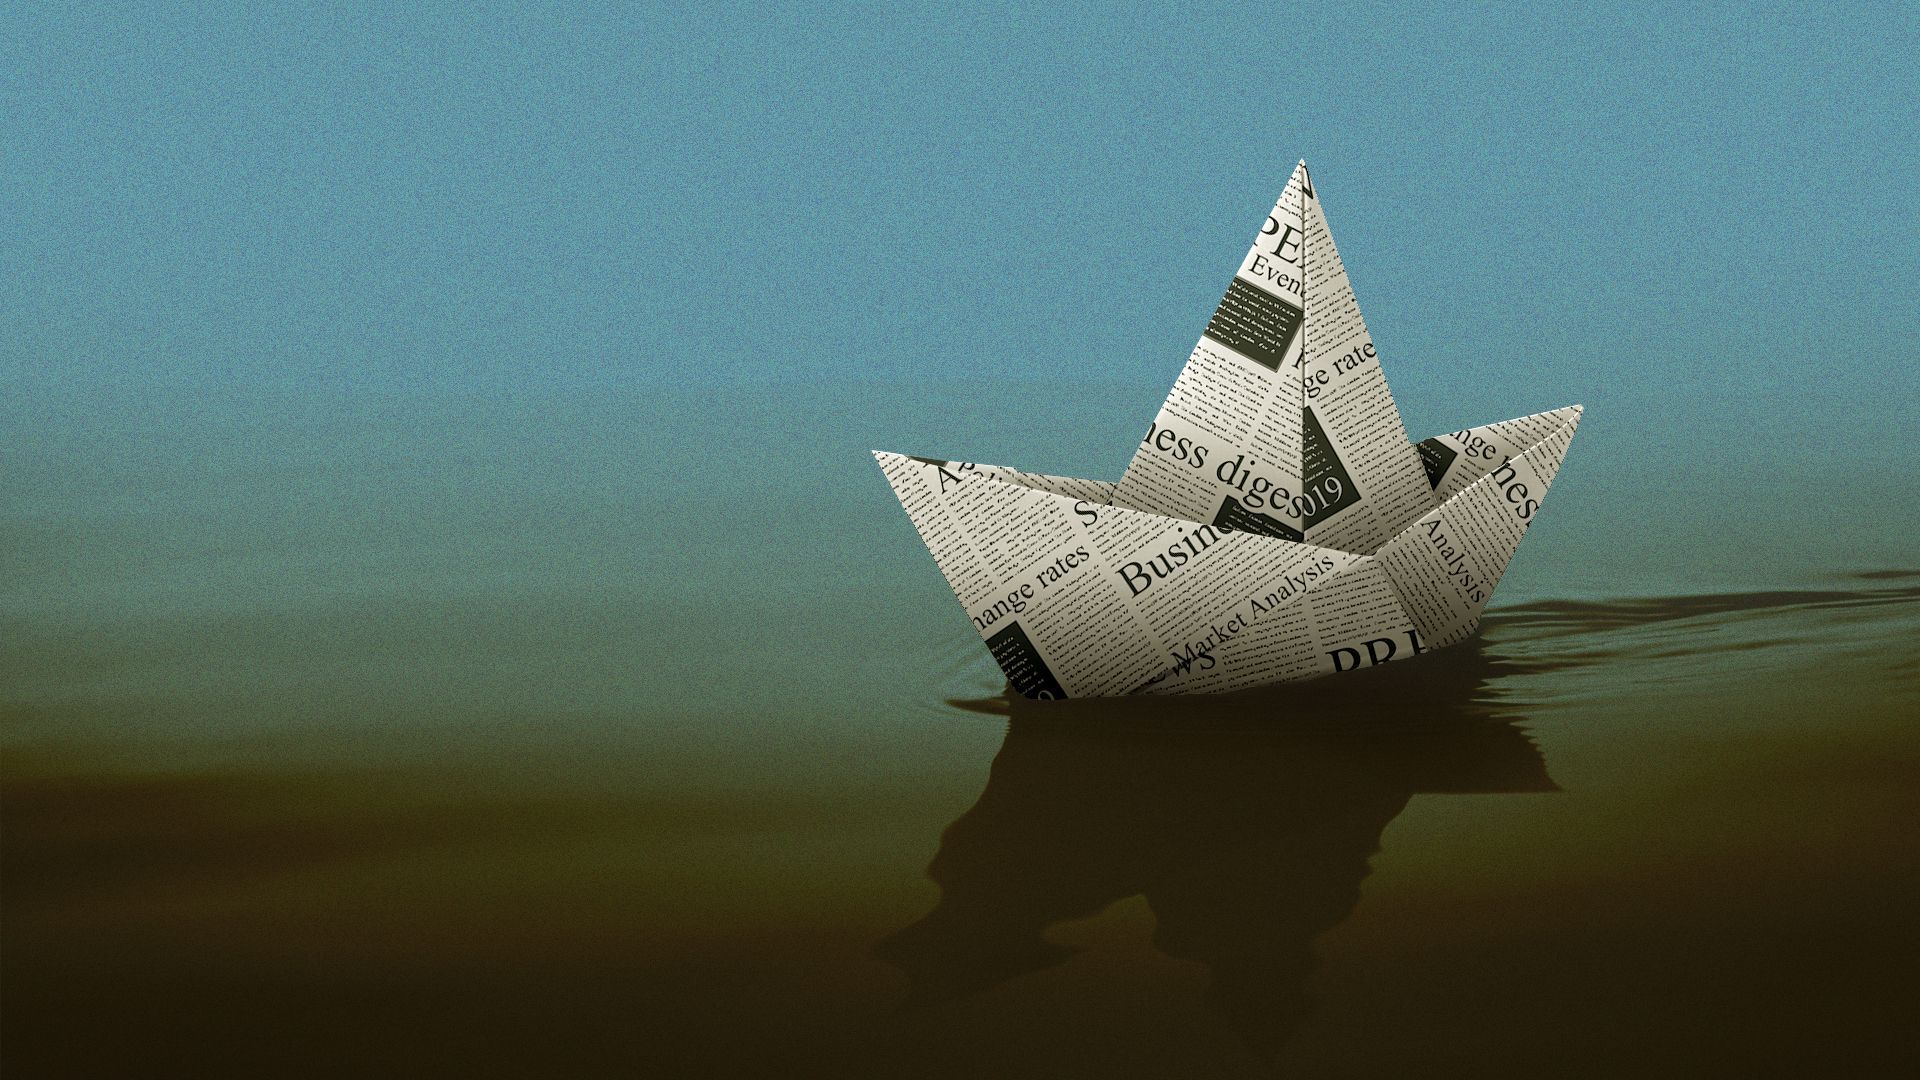 Illustration of a origami boat made out of a newspaper.